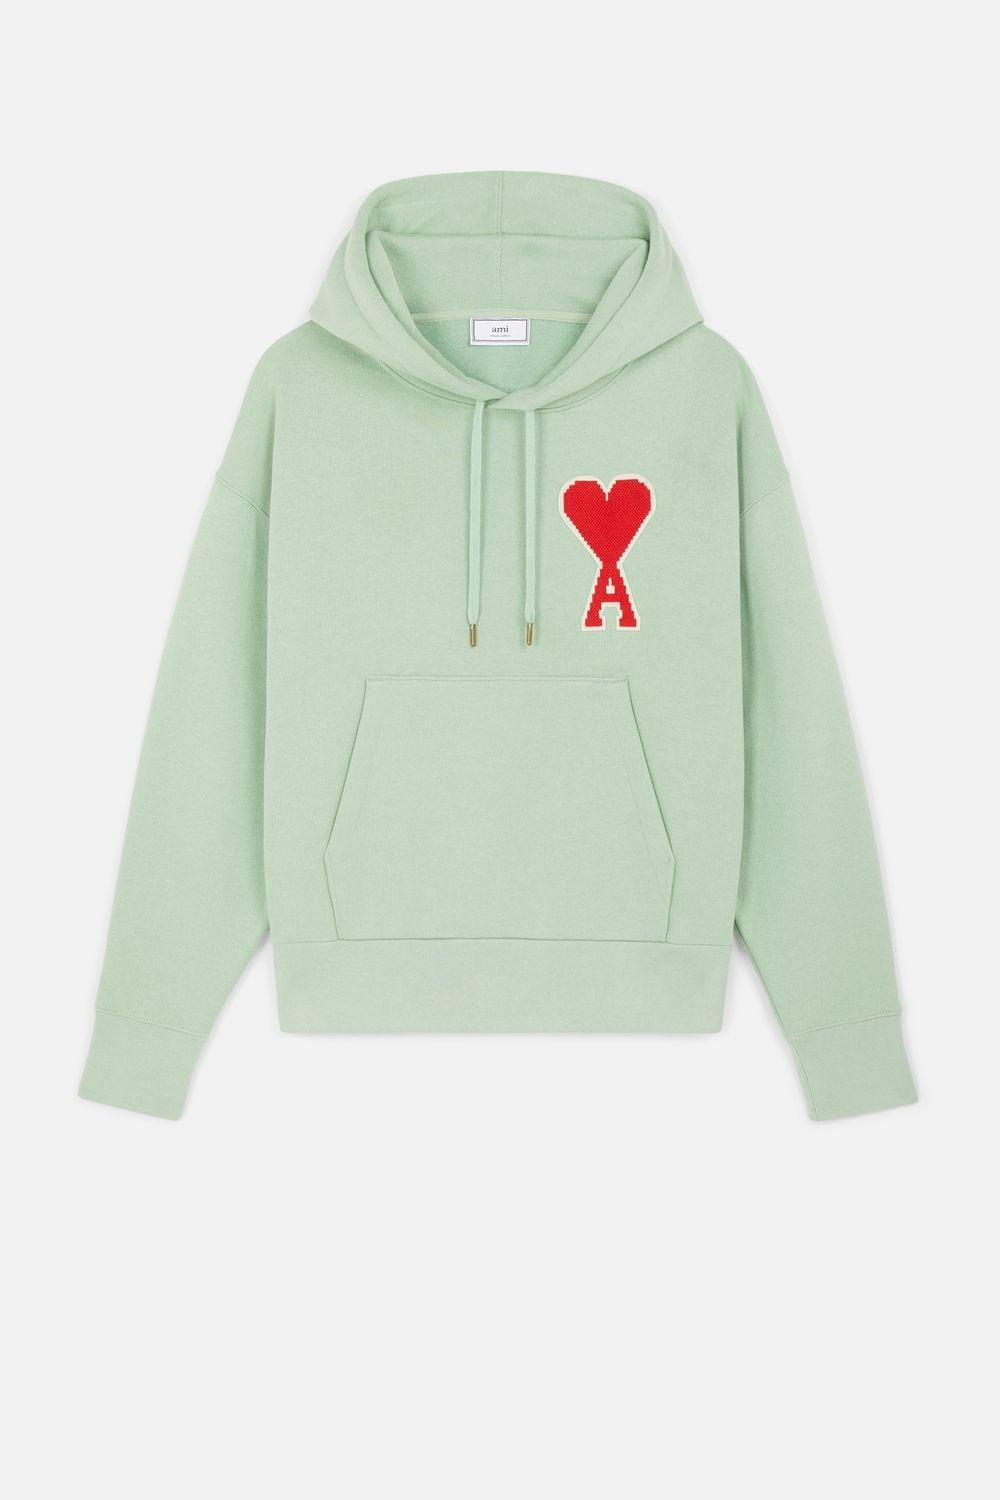 AMI Synthetic Hoodie With Big Ami Coeur Patch in Green for Men - Lyst